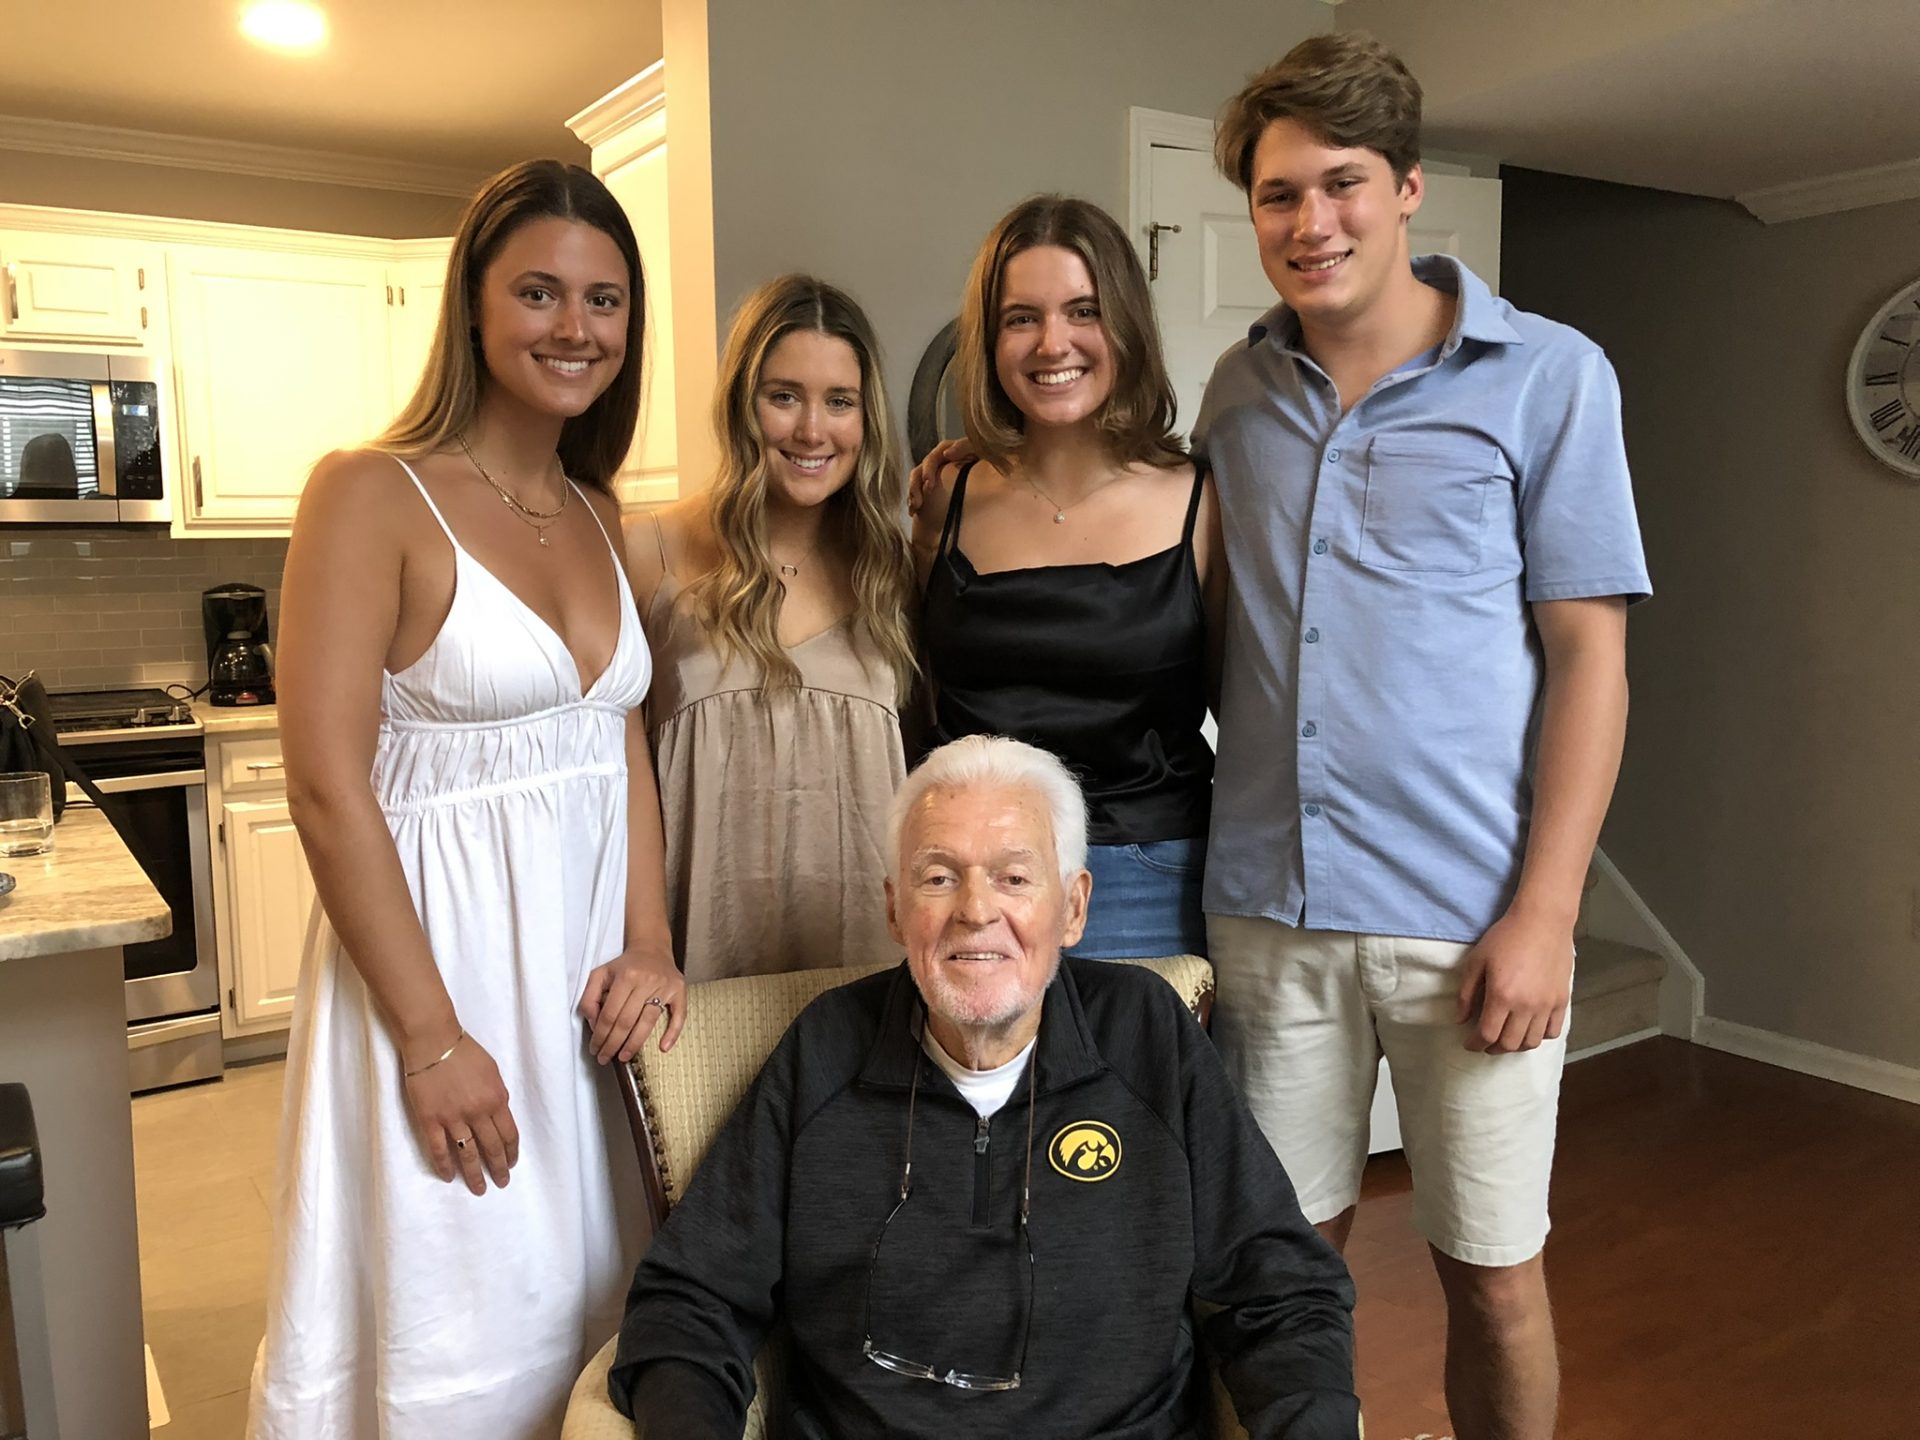 Pop pop and his three squirrels and a chipmunk!